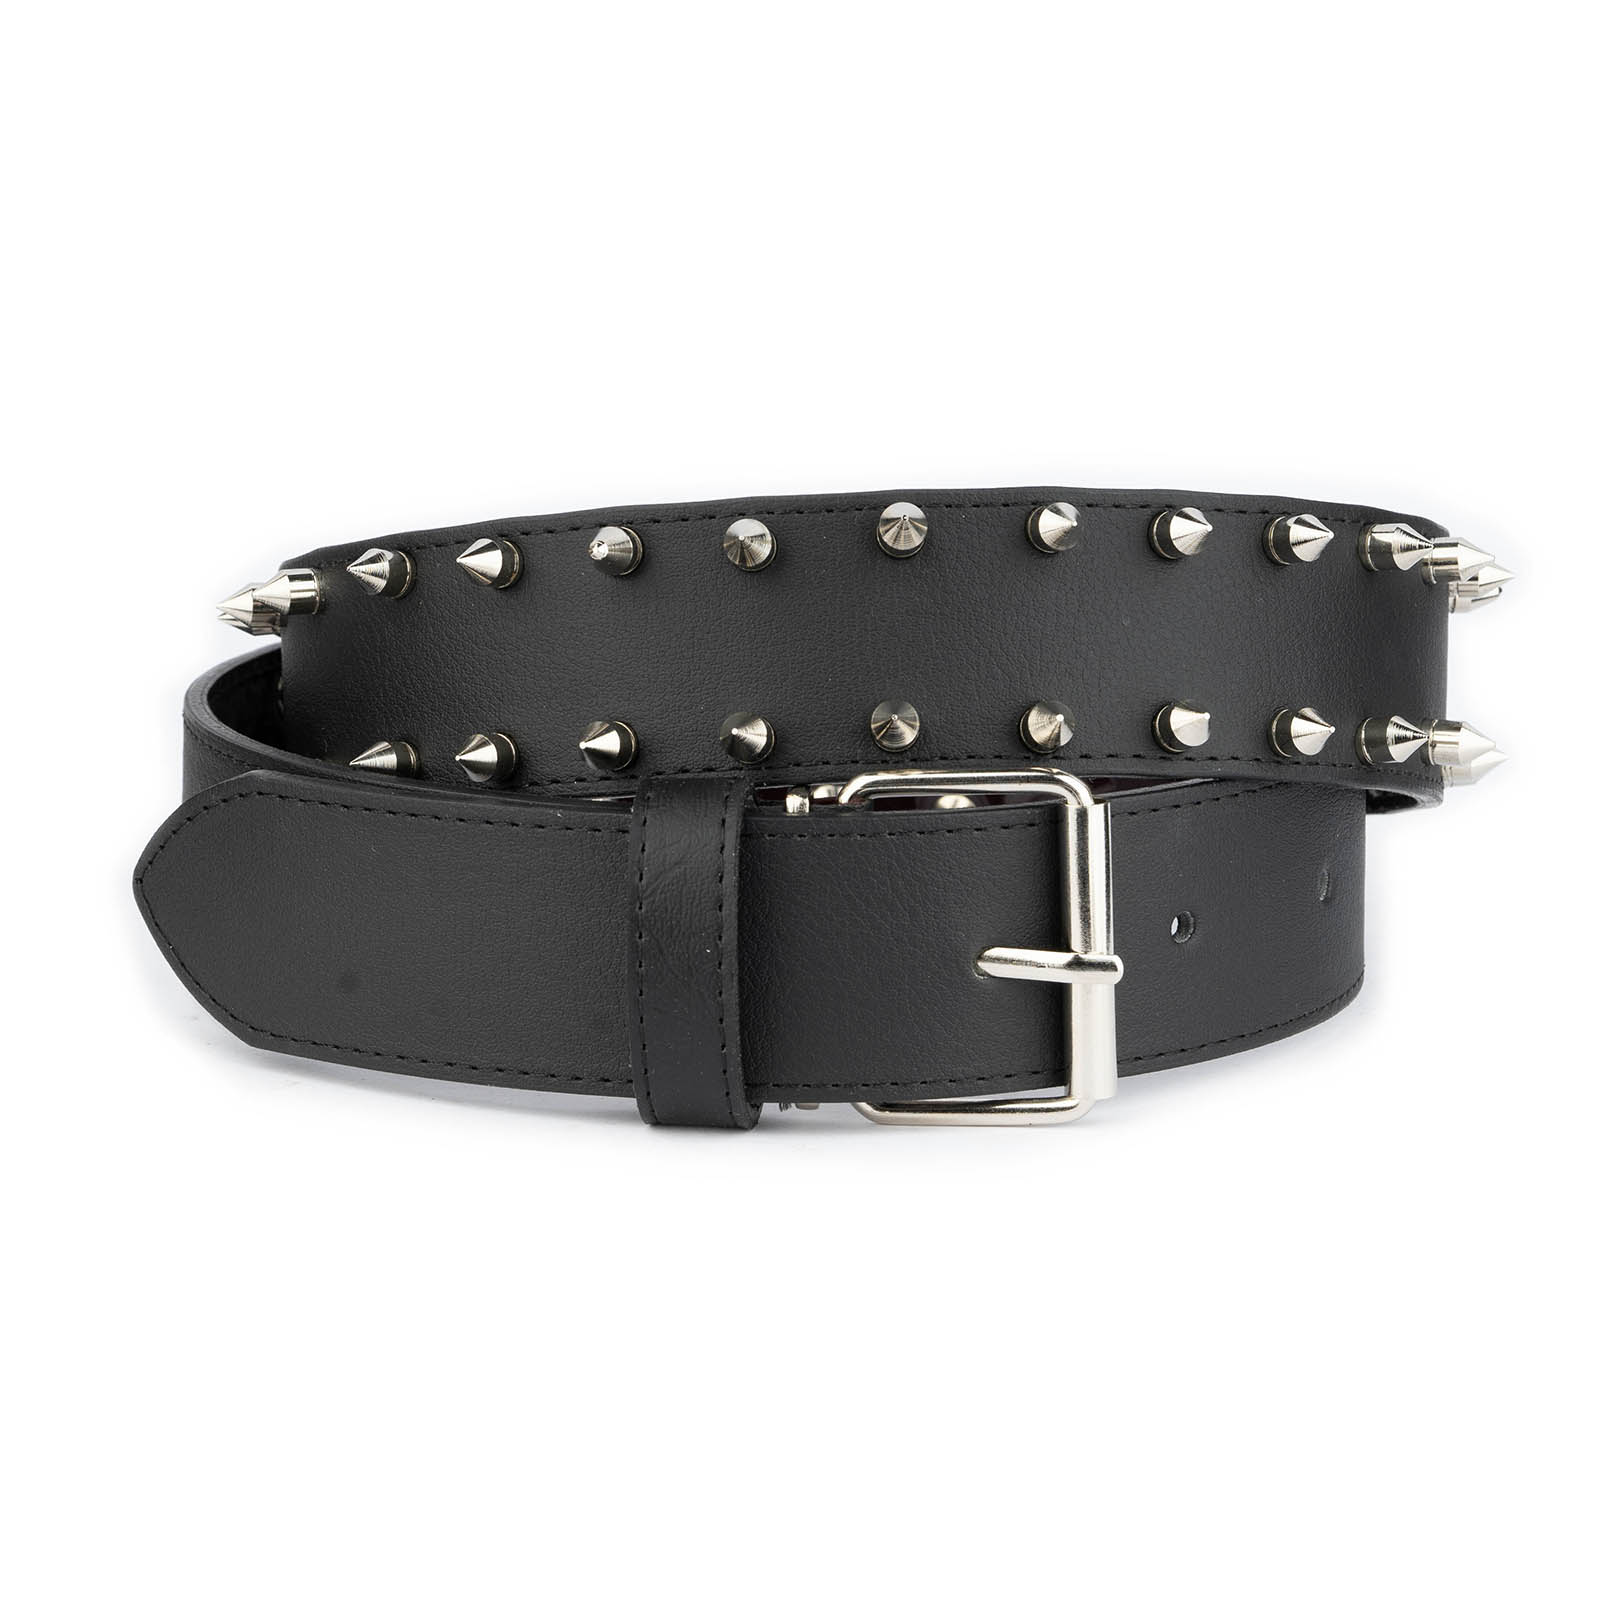 Buy Goth Belt Spiked Black Vegan Leather 2 Row Spikes ...